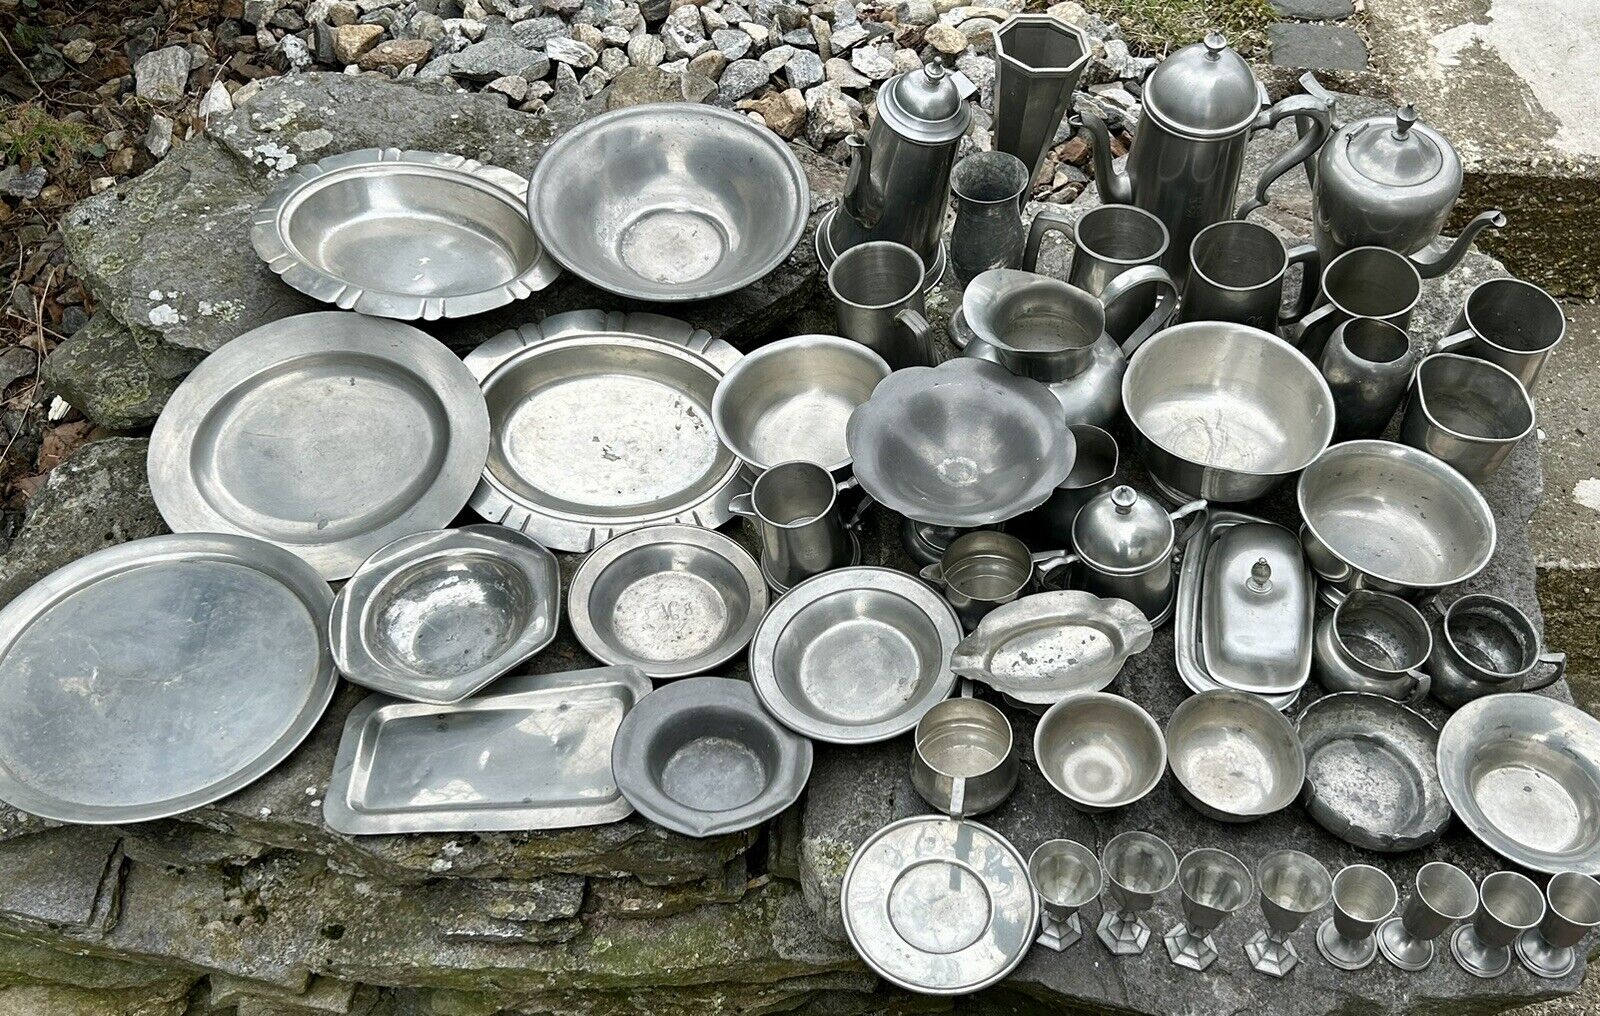 Scrap PEWTER Lot 30+ Lbs~All Marked Pewter~Reloading Crafts Jewelry~NO WILTON